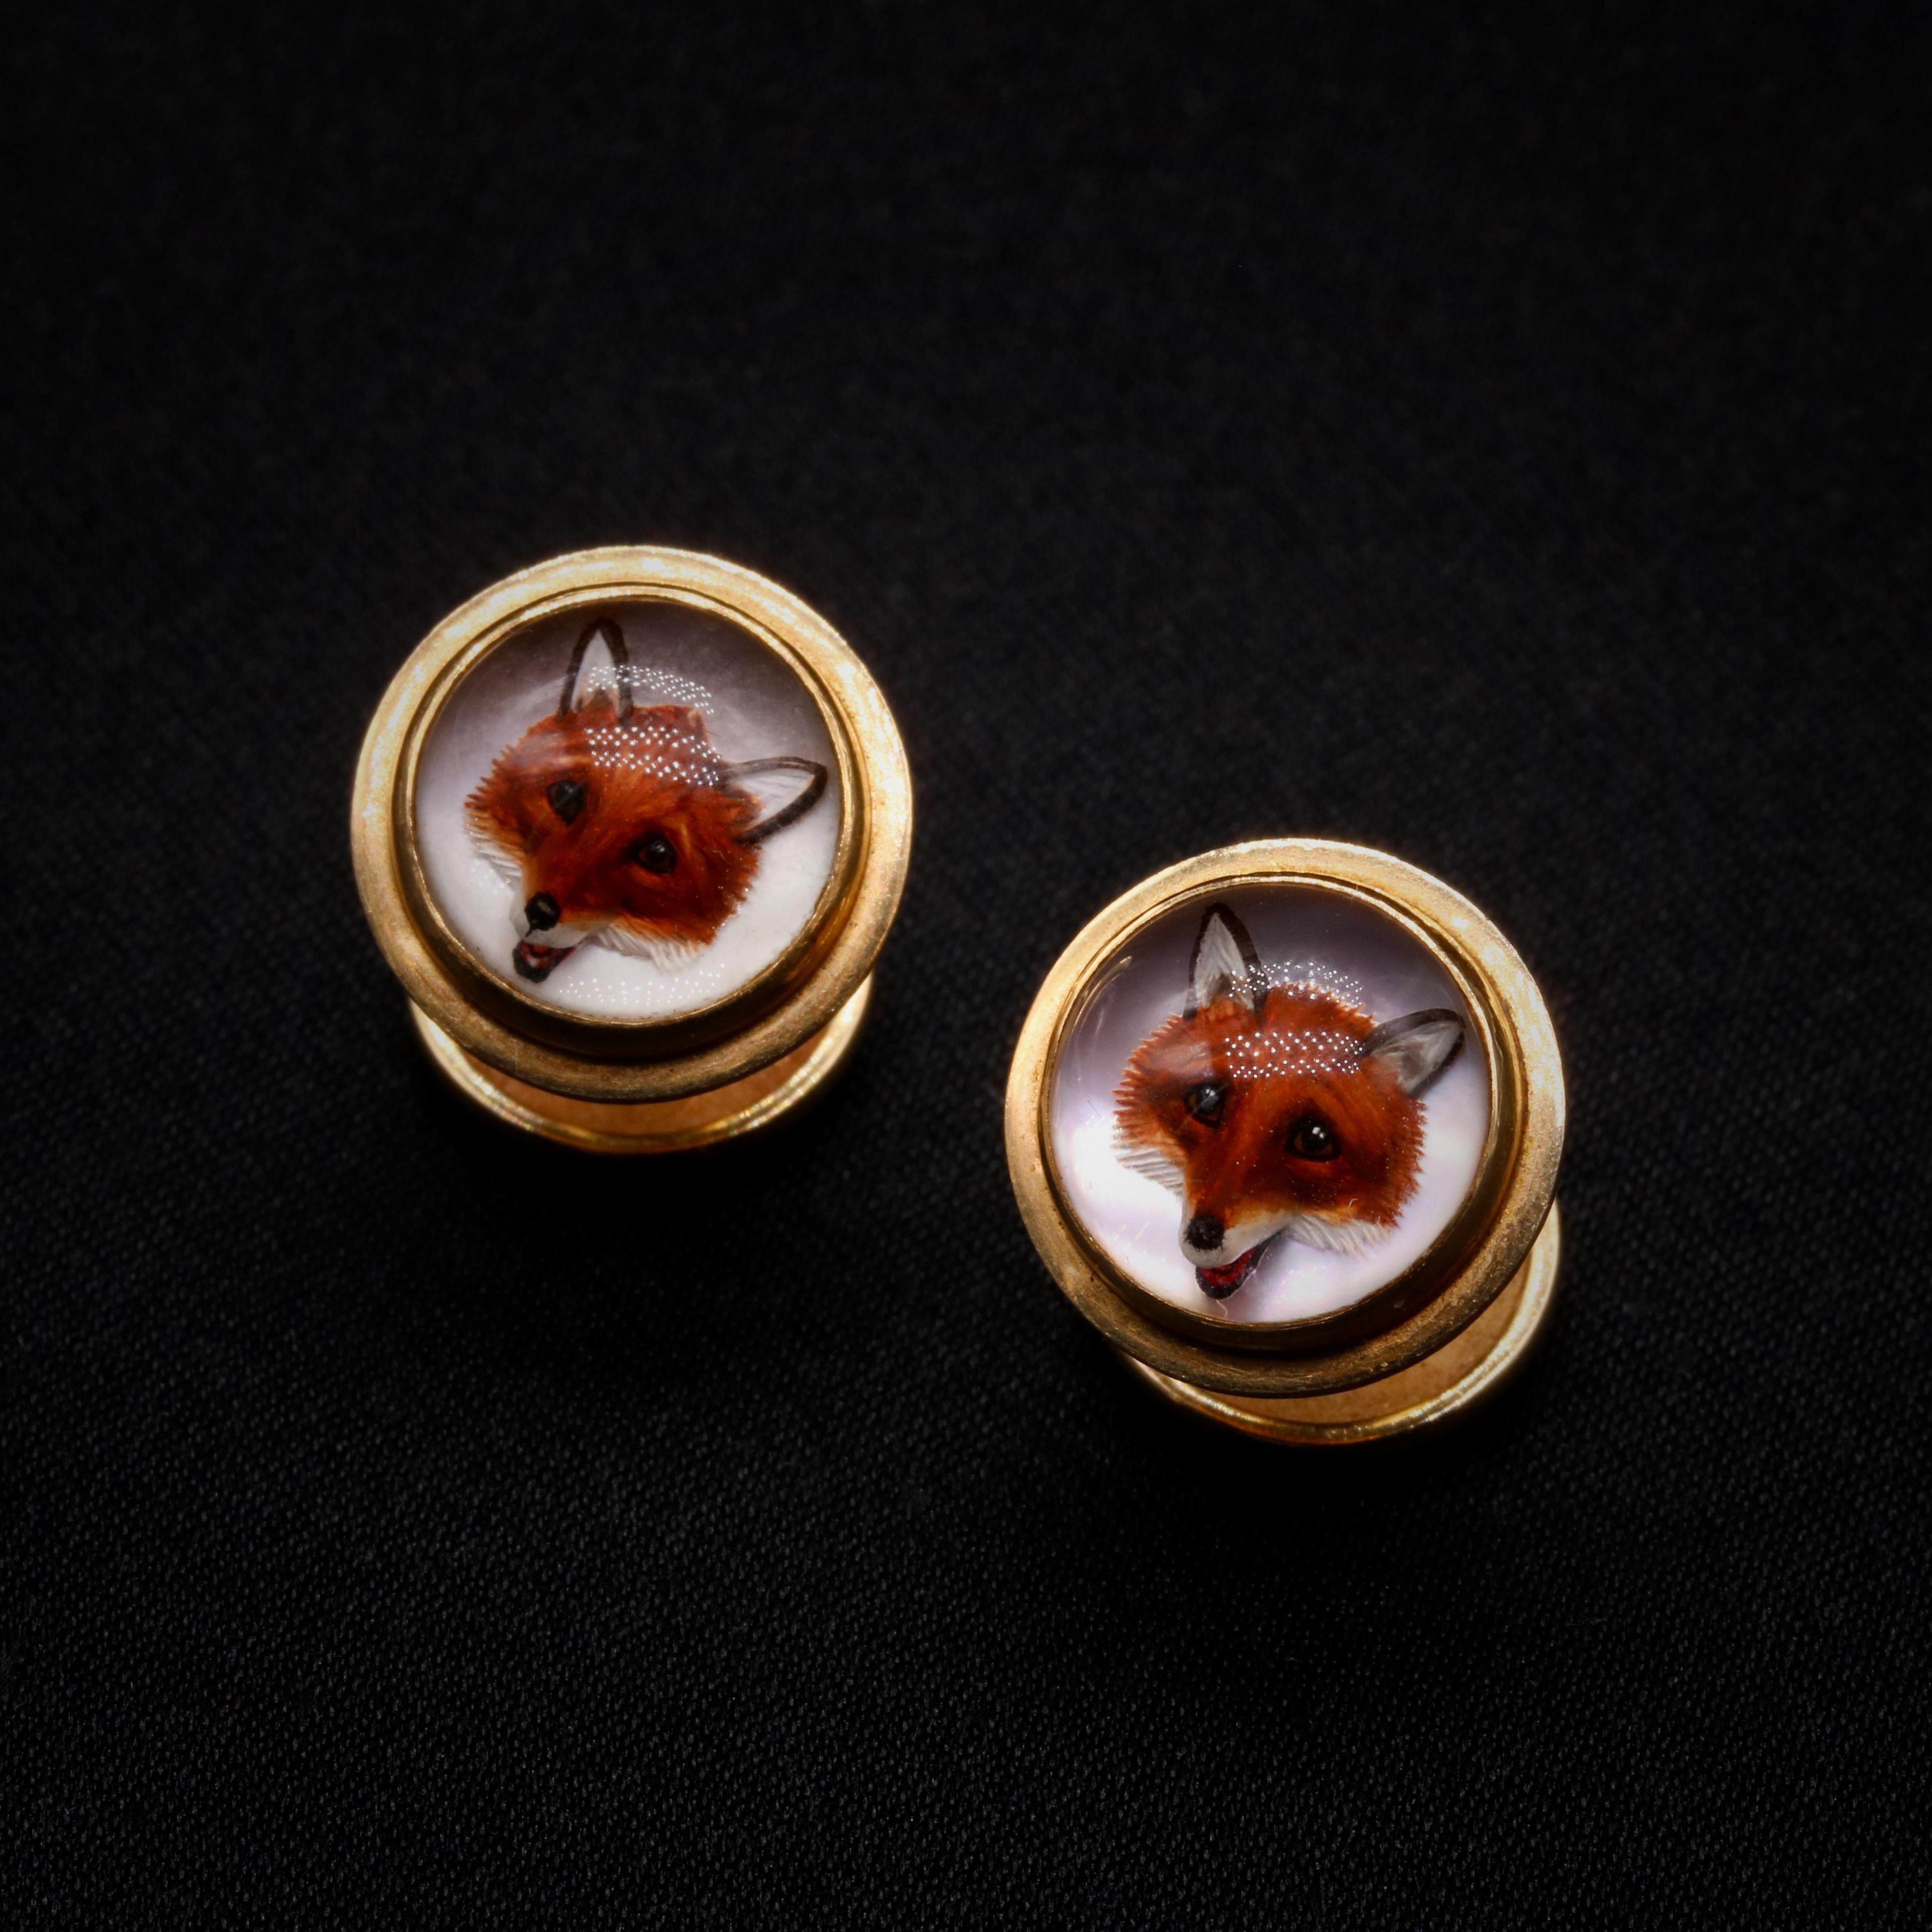 A pair of Victorian rock crystal and yellow gold cufflinks, each comprising a round cabochon rock crystal, painted with the image of a fox, set in 18 karat yellow gold, with 18 karat yellow gold fittings. 

These charming Victorian cufflinks each